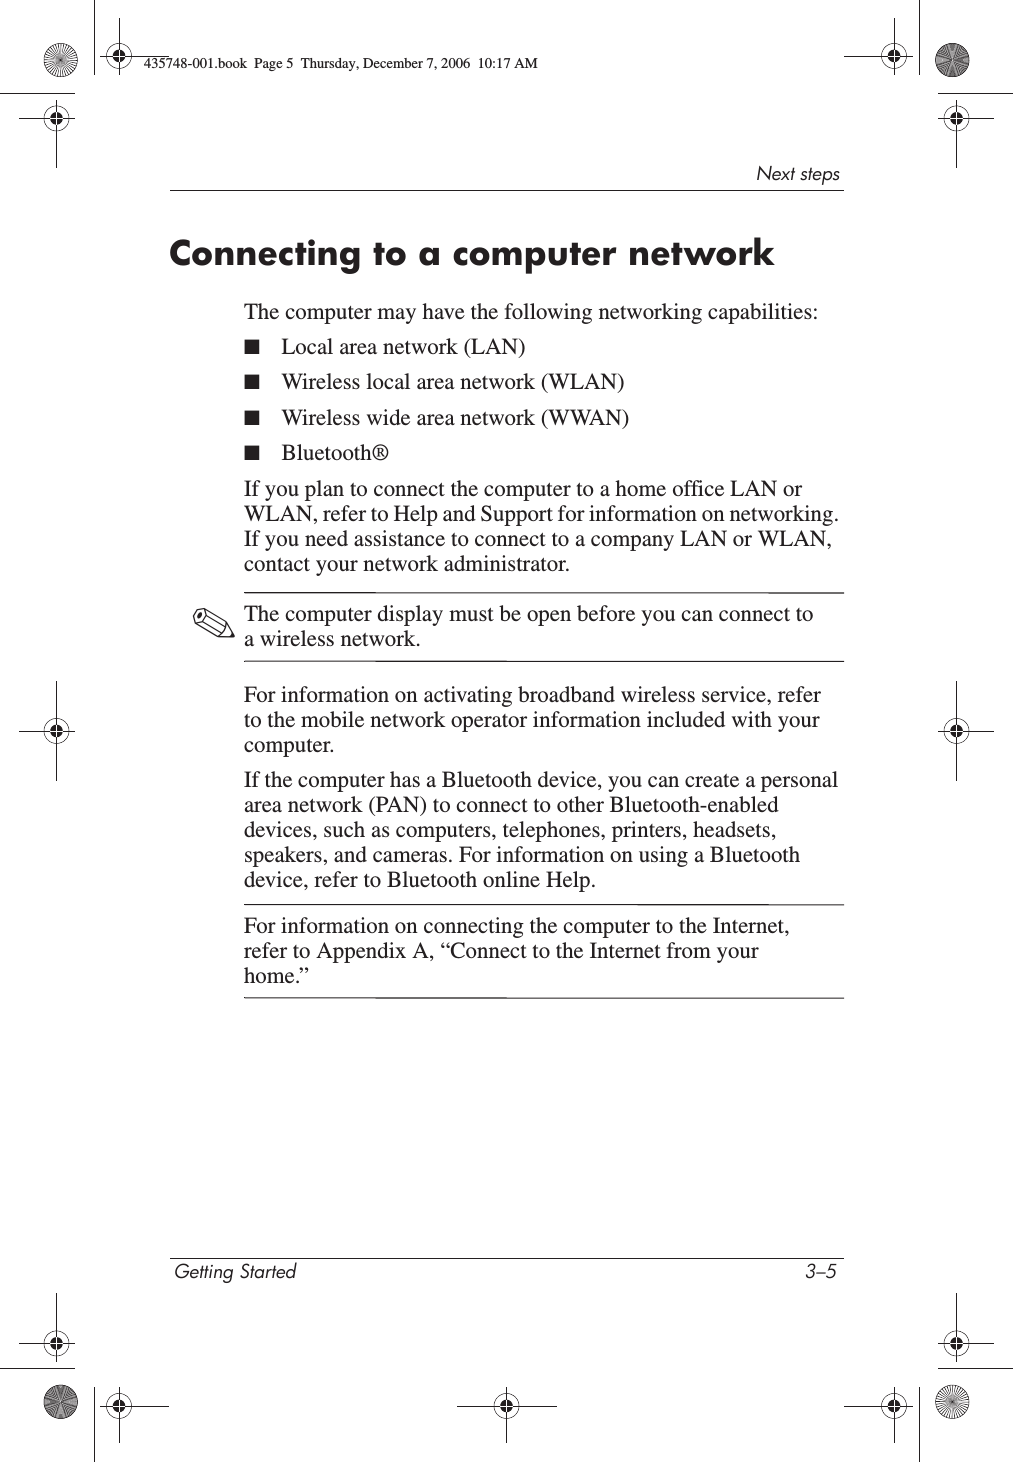 Next stepsGetting Started 3–5Connecting to a computer networkThe computer may have the following networking capabilities:■Local area network (LAN)■Wireless local area network (WLAN)■Wireless wide area network (WWAN)■Bluetooth®If you plan to connect the computer to a home office LAN or WLAN, refer to Help and Support for information on networking. If you need assistance to connect to a company LAN or WLAN, contact your network administrator. ✎The computer display must be open before you can connect to a wireless network.For information on activating broadband wireless service, refer to the mobile network operator information included with your computer.If the computer has a Bluetooth device, you can create a personal area network (PAN) to connect to other Bluetooth-enabled devices, such as computers, telephones, printers, headsets, speakers, and cameras. For information on using a Bluetooth device, refer to Bluetooth online Help.For information on connecting the computer to the Internet, refer to Appendix A, “Connect to the Internet from your home.”435748-001.book  Page 5  Thursday, December 7, 2006  10:17 AM